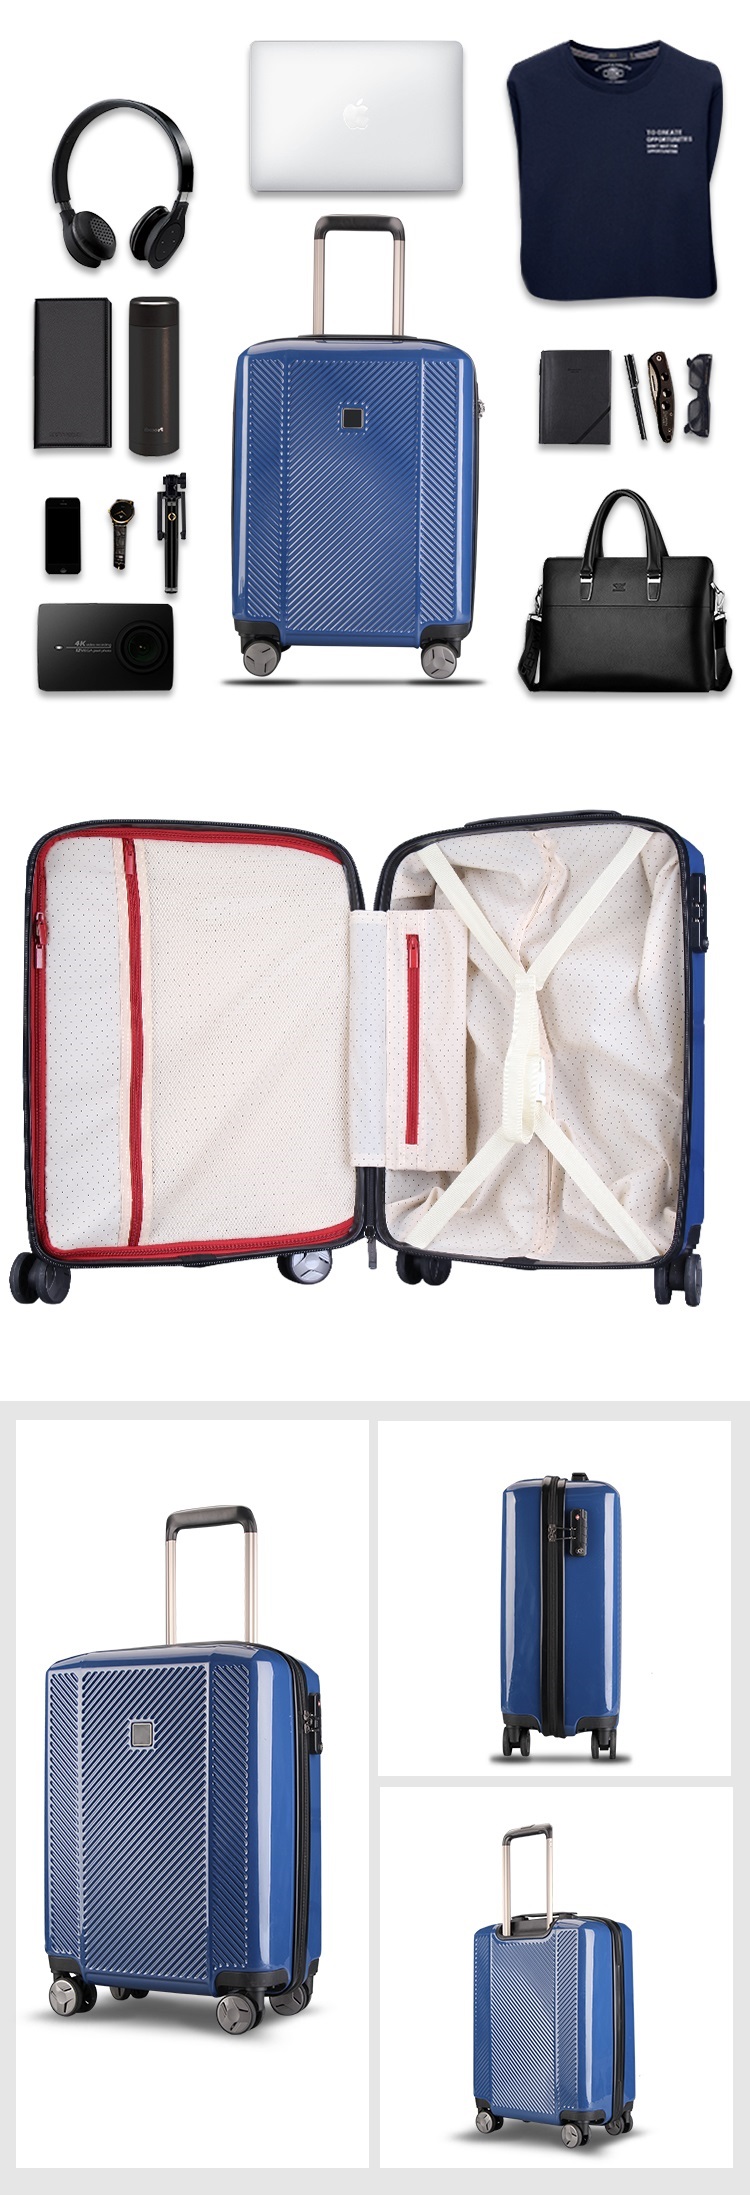 Carry on travel luggage